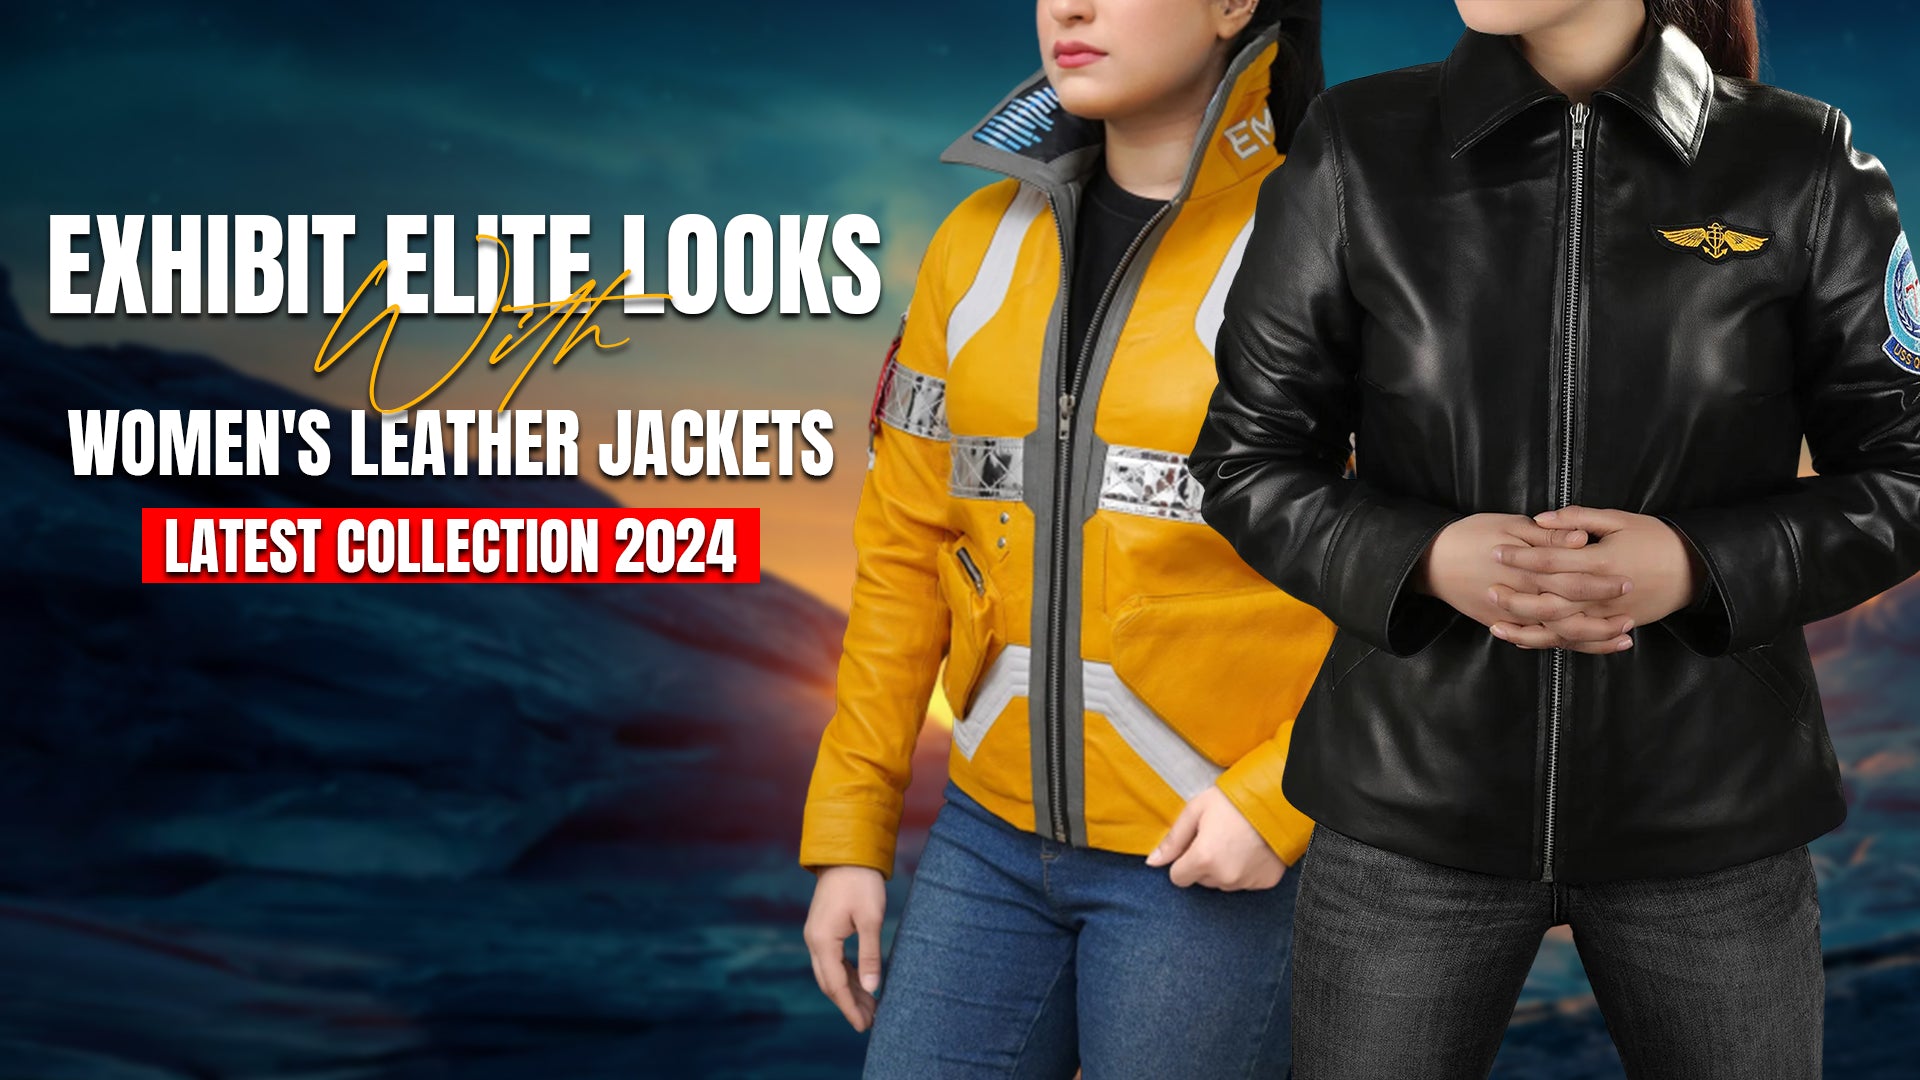 Exhibit Elite Looks With Women's Leather Jackets Latest Collection 2024